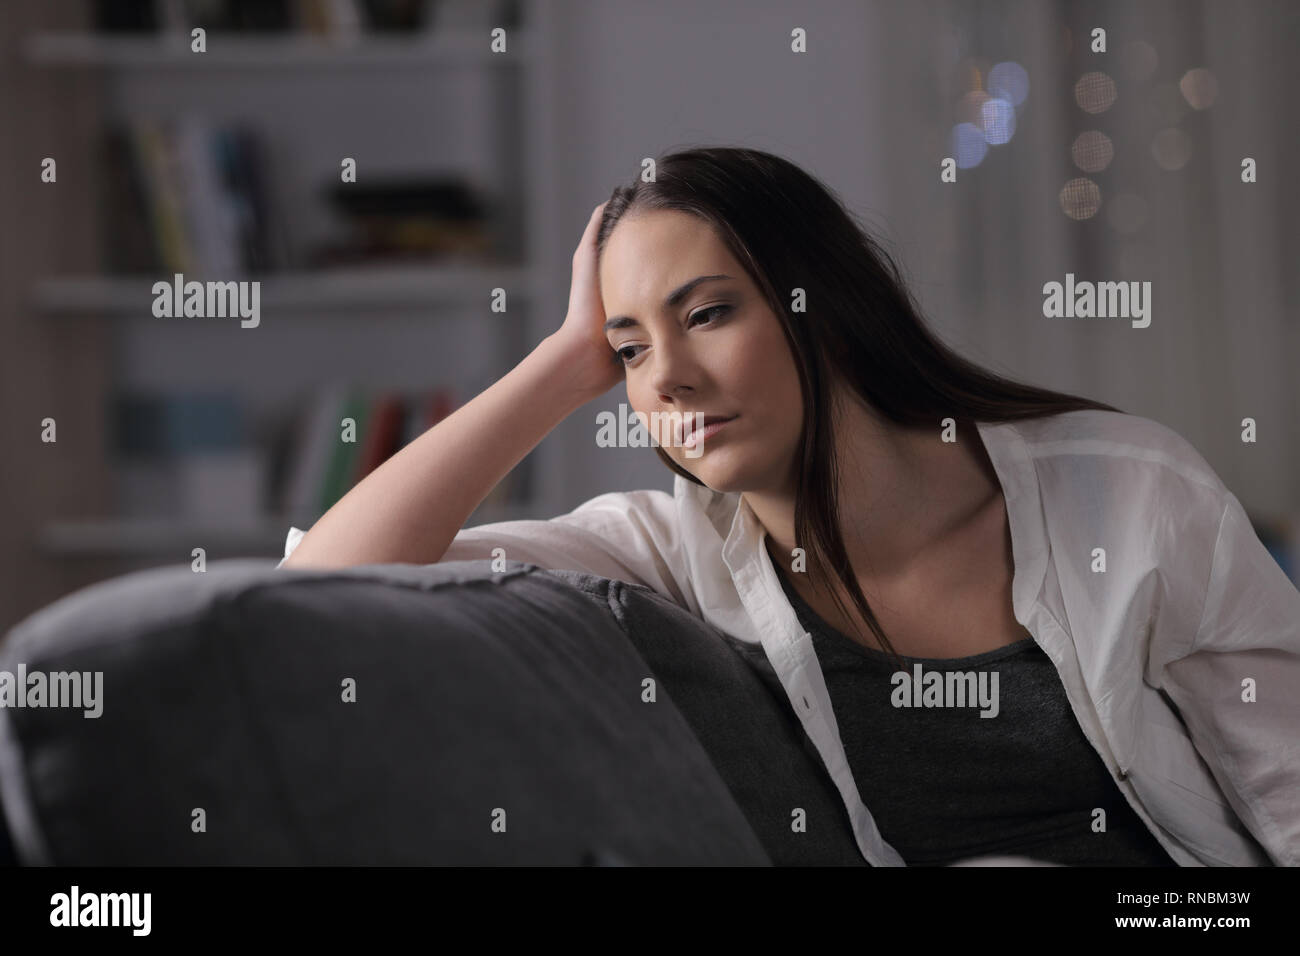 Sad woman looks away sitting on a couch in the night at home Stock Photo